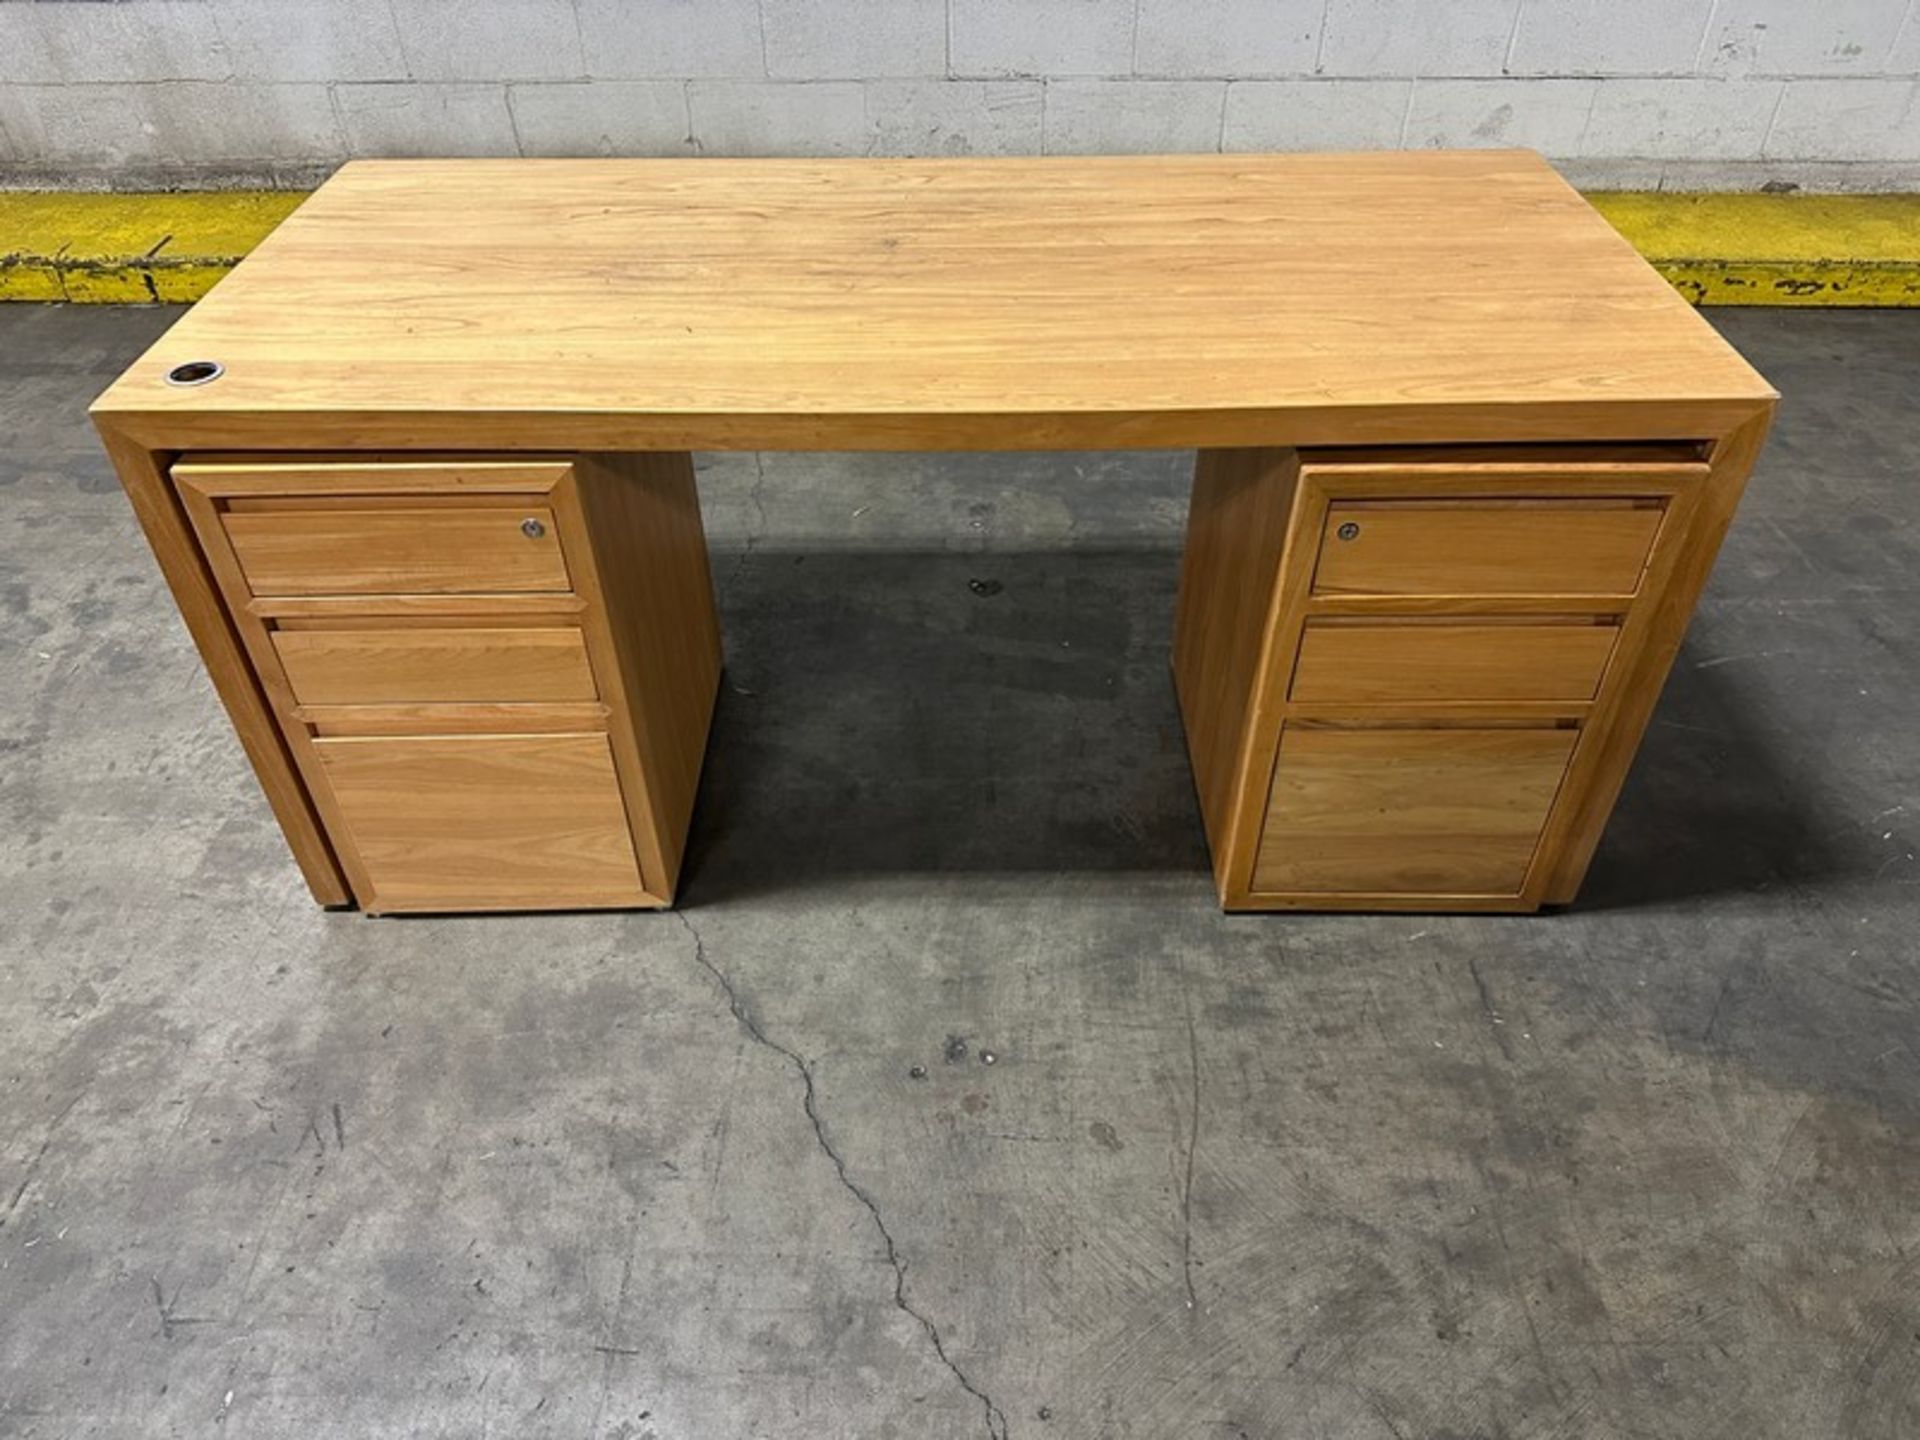 Desks: LOT (7pcs) 66" x 30" x 29"h (Located East Rutherford, NJ) (NOTE: REMOVAL 2-DAYS ONLY - Image 2 of 4